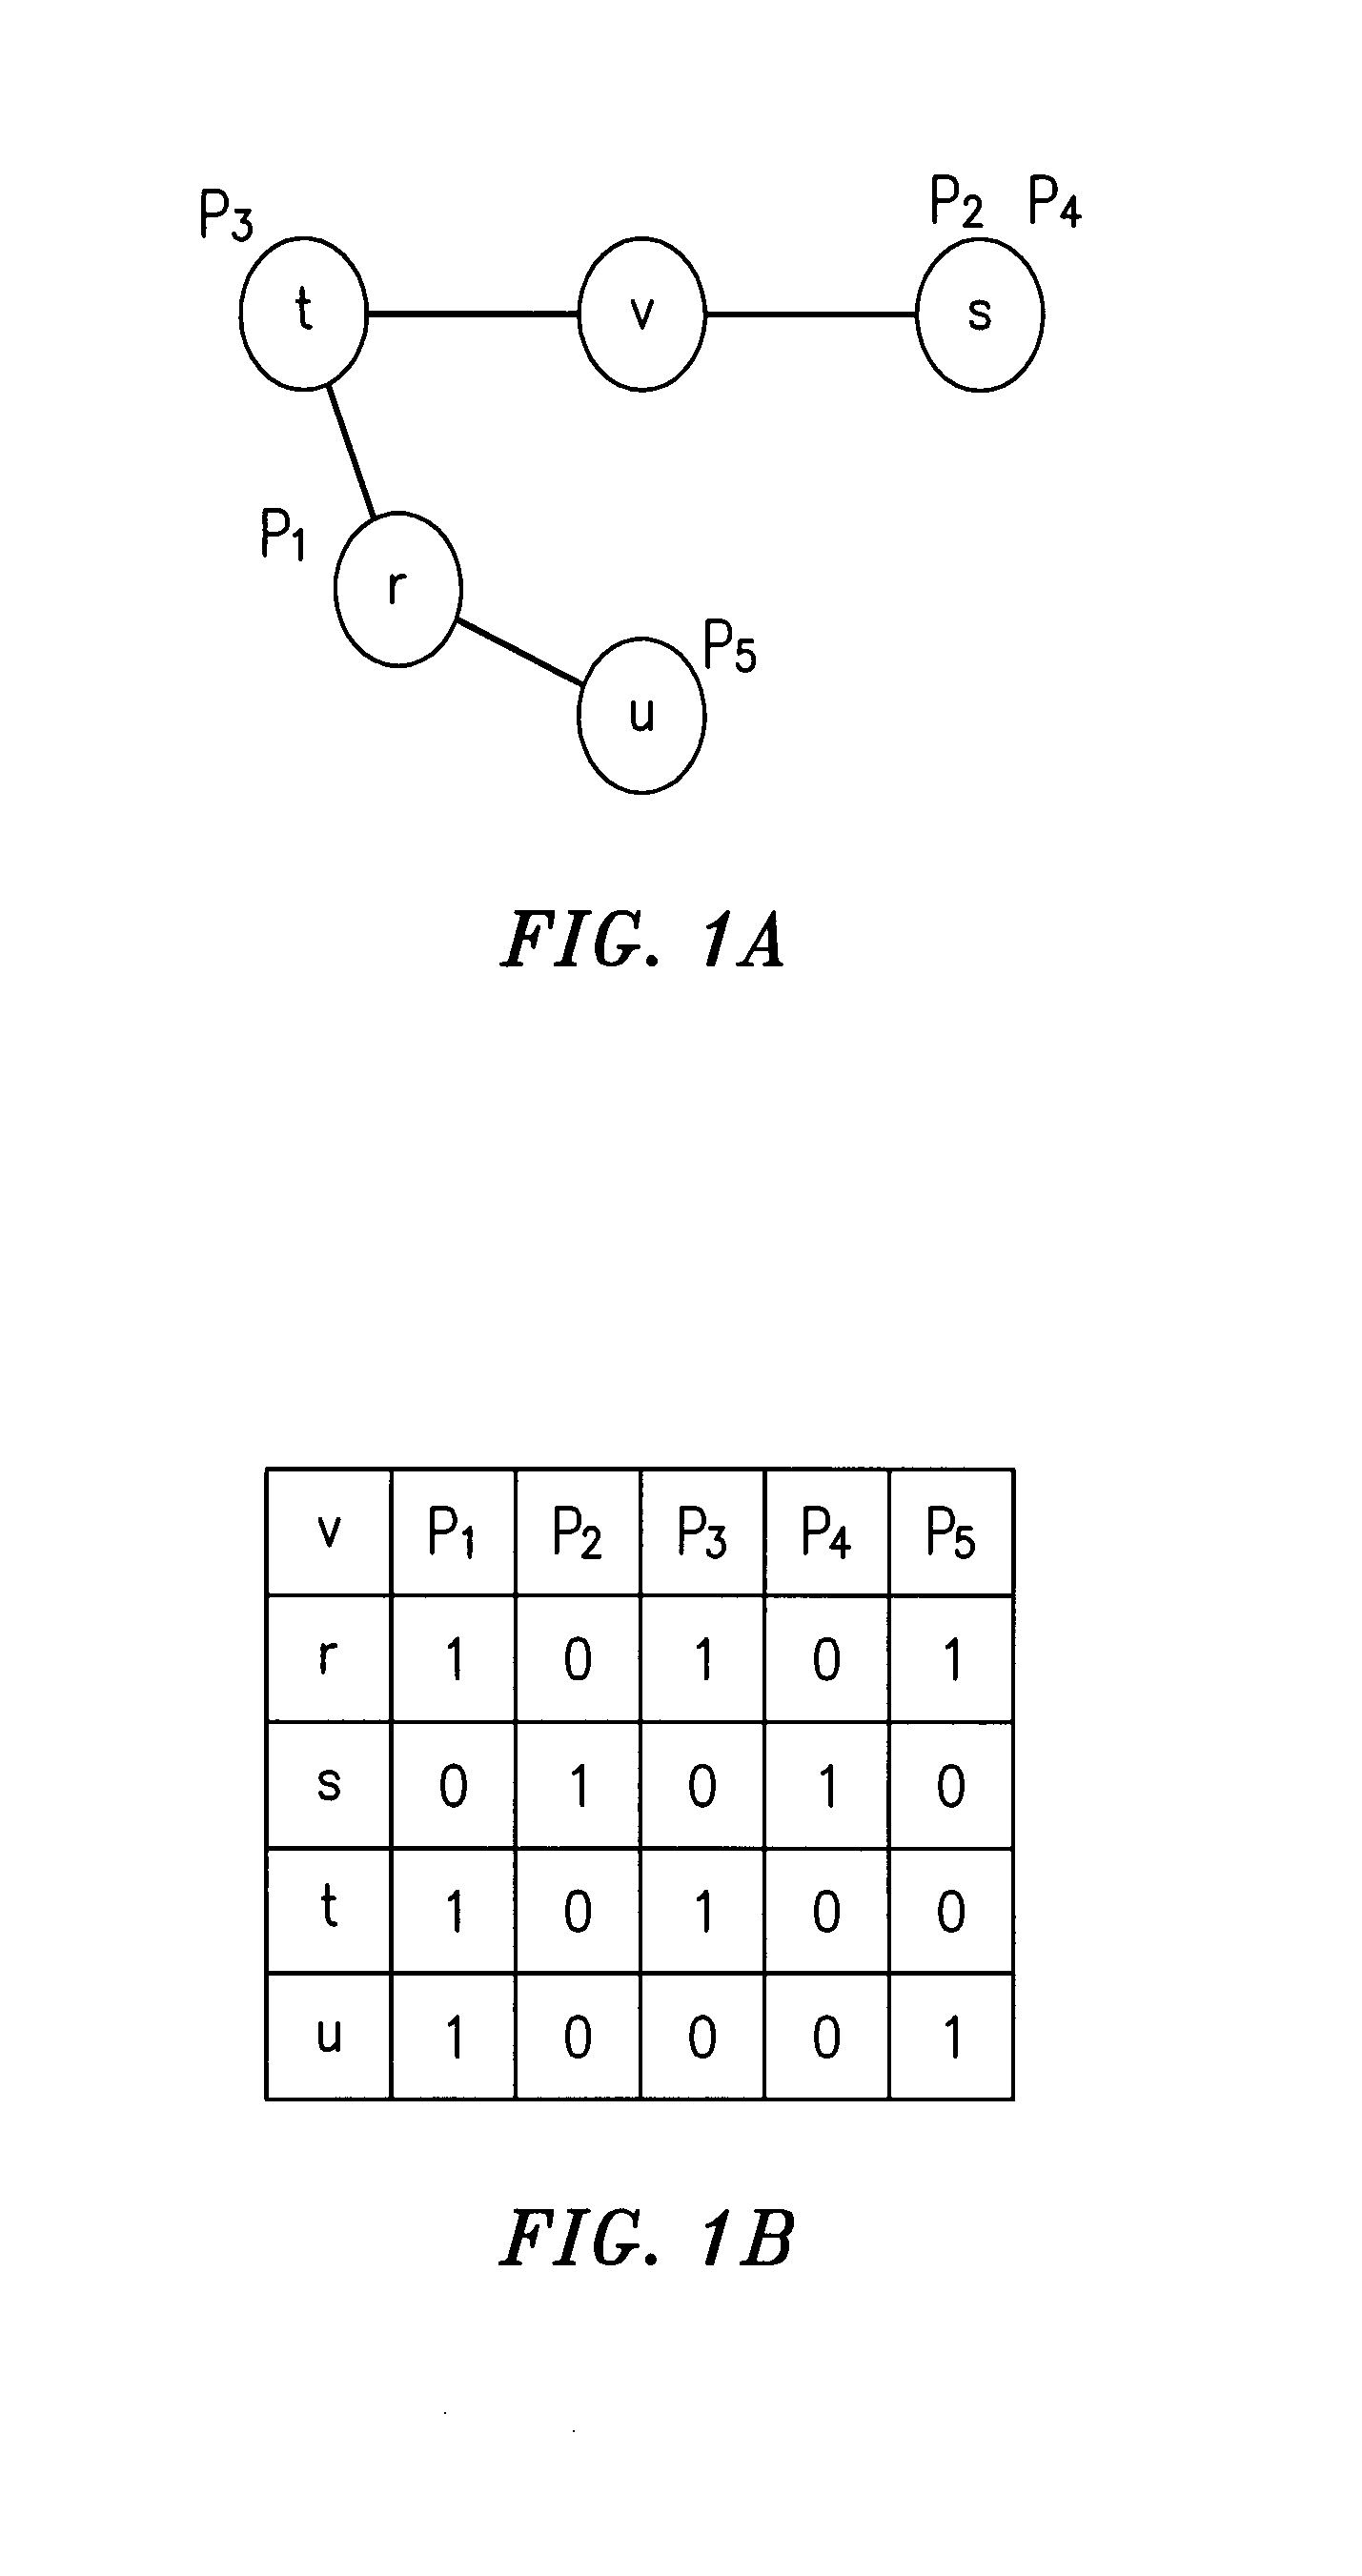 Apparatus and method for practical and efficient broadcast in mobile ad hoc networks